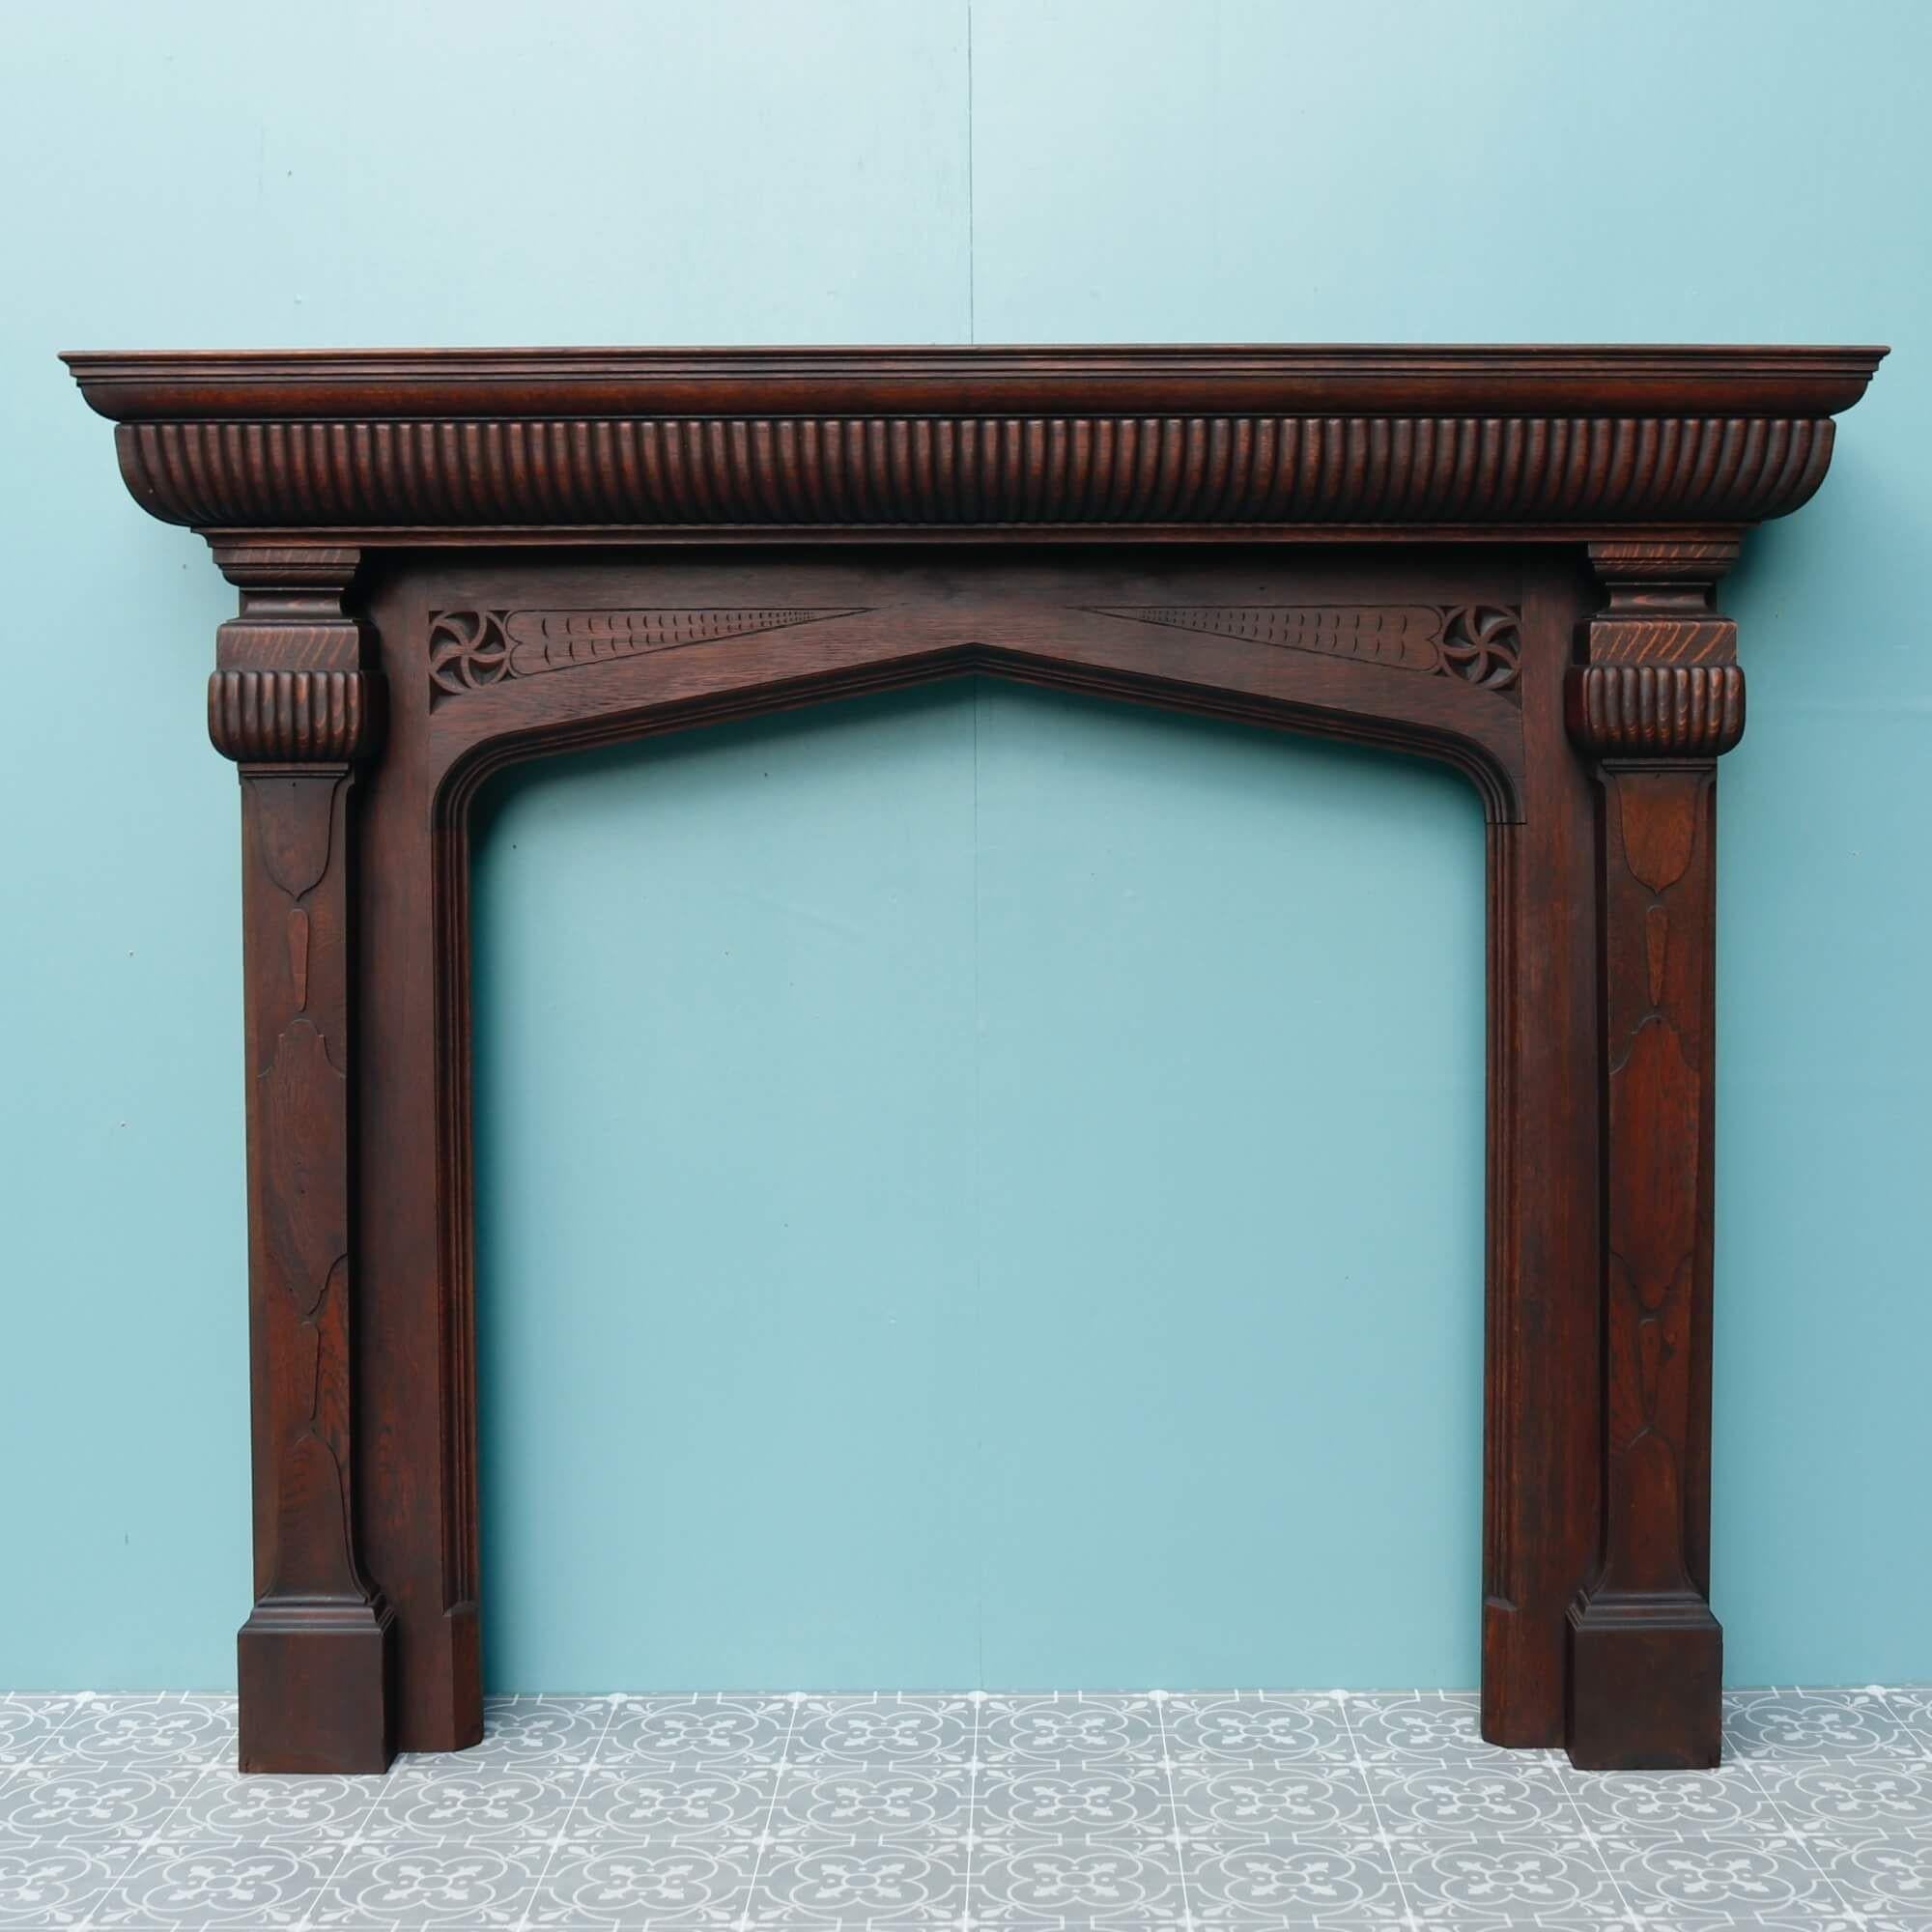 A deep, large scale English solid oak antique fireplace dating from the 1880s. Re-finished, this spectacular fireplace has a rich patina throughout that looks impressive in a variety of period settings. The craftsmanship is a blend of Tudor, Gothic